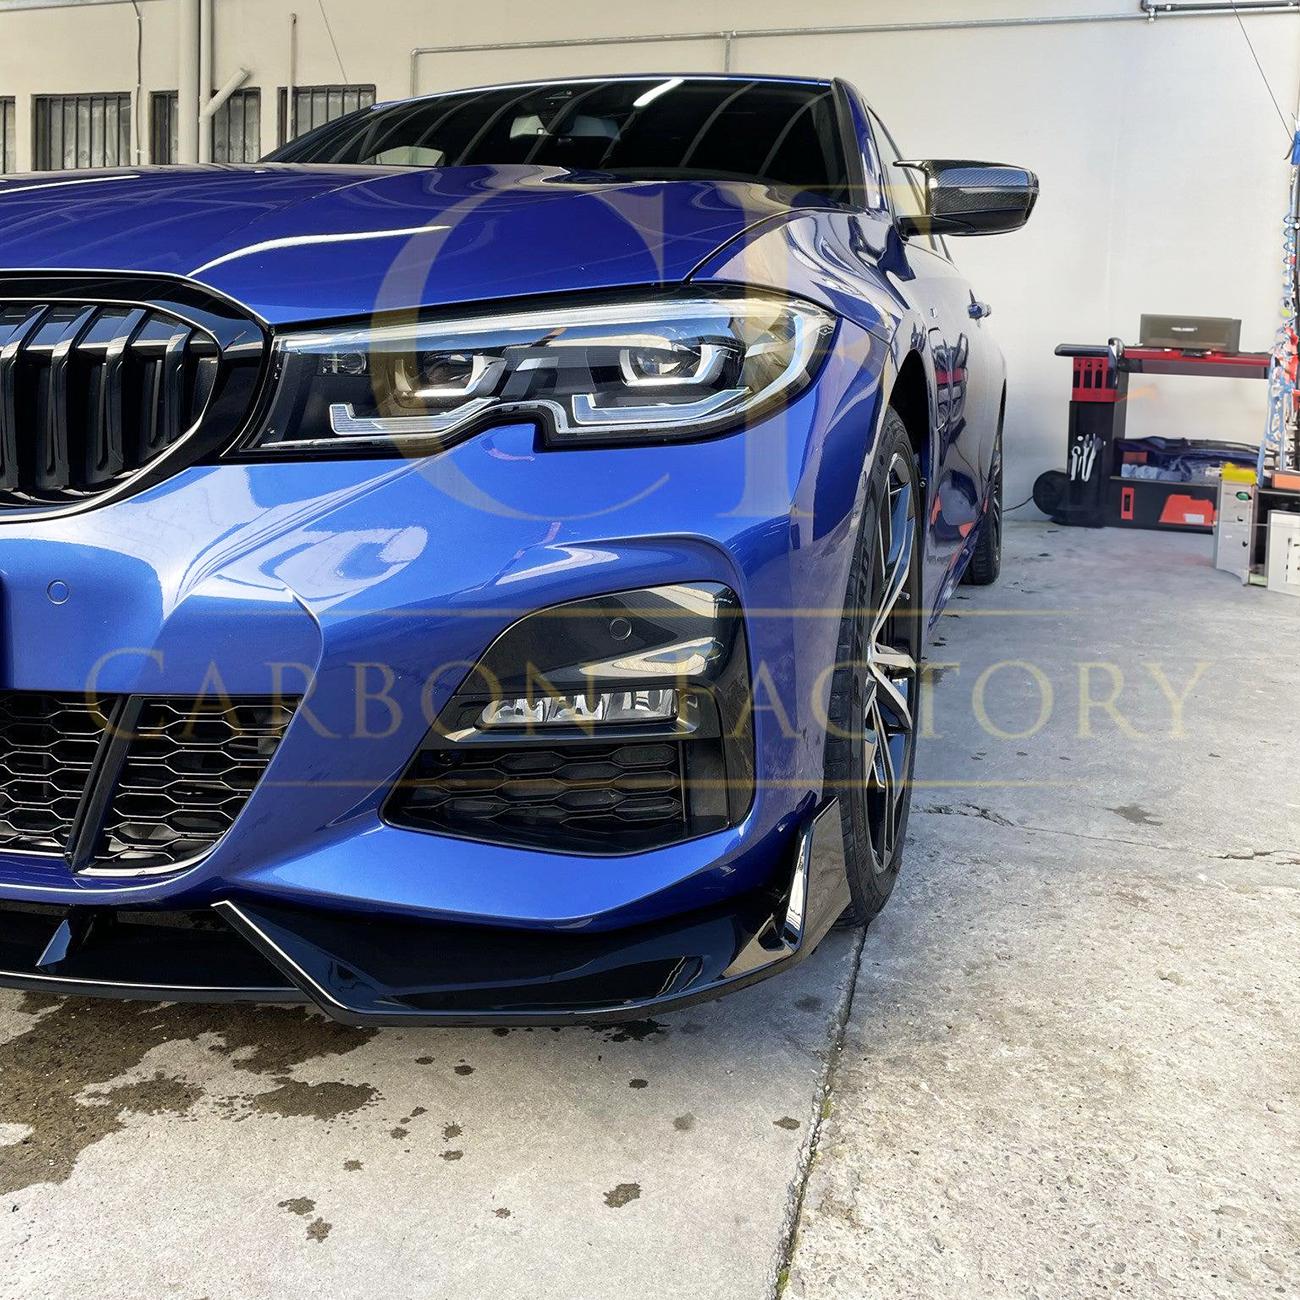 BMW 3 Series G20 Pre-LCI Gloss Black Competition Style Front Splitter 19-22-Carbon Factory